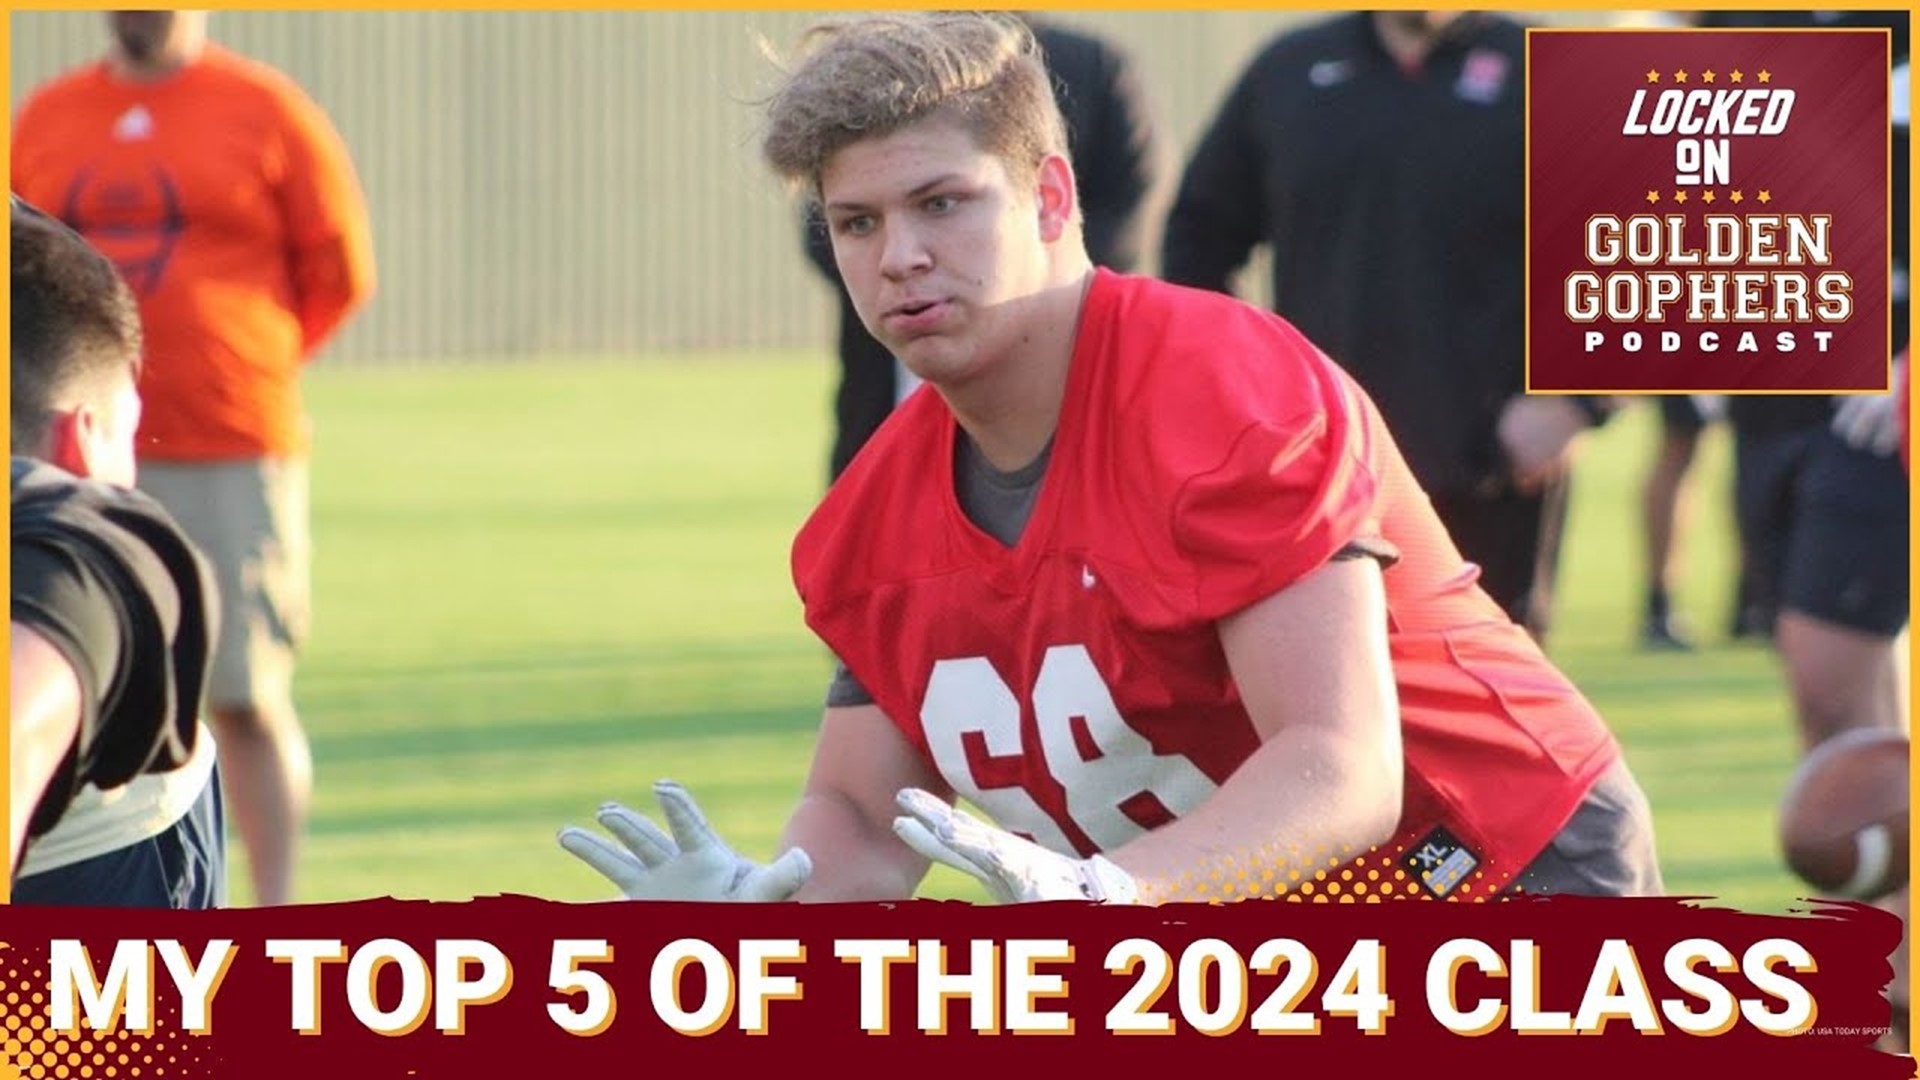 On today's Locked On Golden Gophers, host Kane Rob,  discusses how the Minnesota Gophers 2024 Class could play out over their careers.